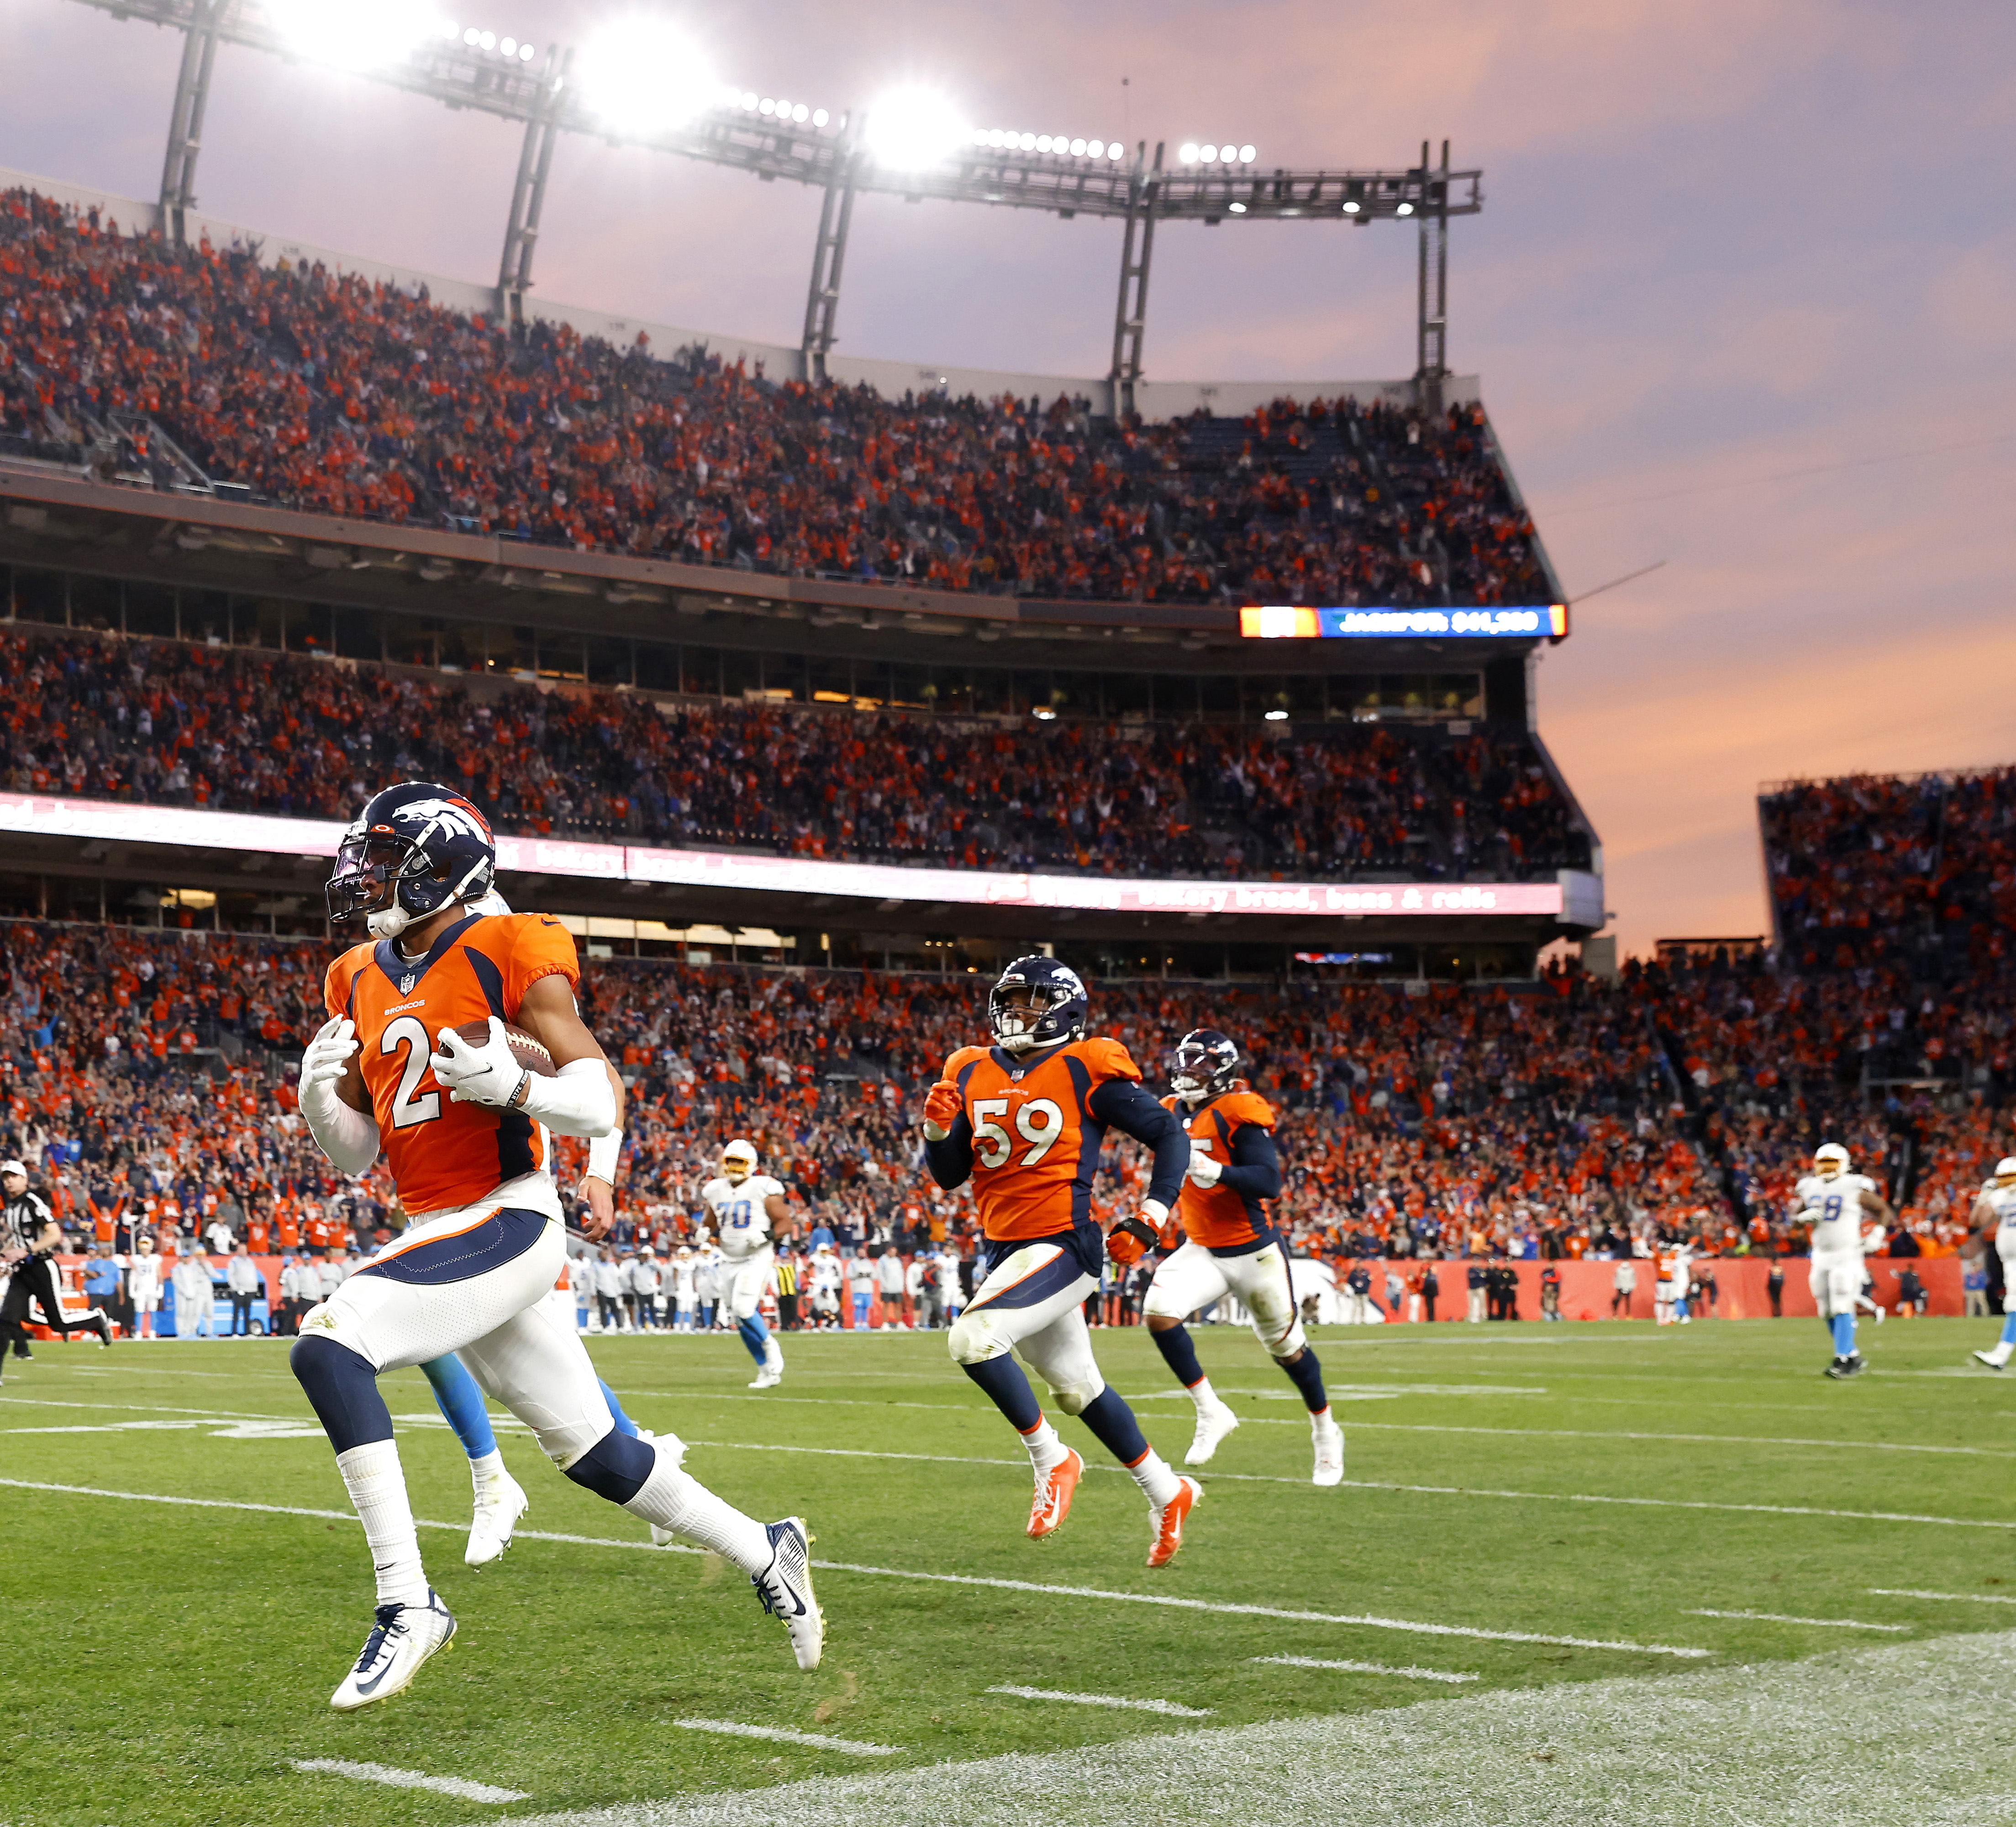 Pat Surtain II of the Denver Broncos carries the ball into the end zone for a touchdown against the Los Angeles Chargers at Empower Field At Mile High on November 28, 2021. 